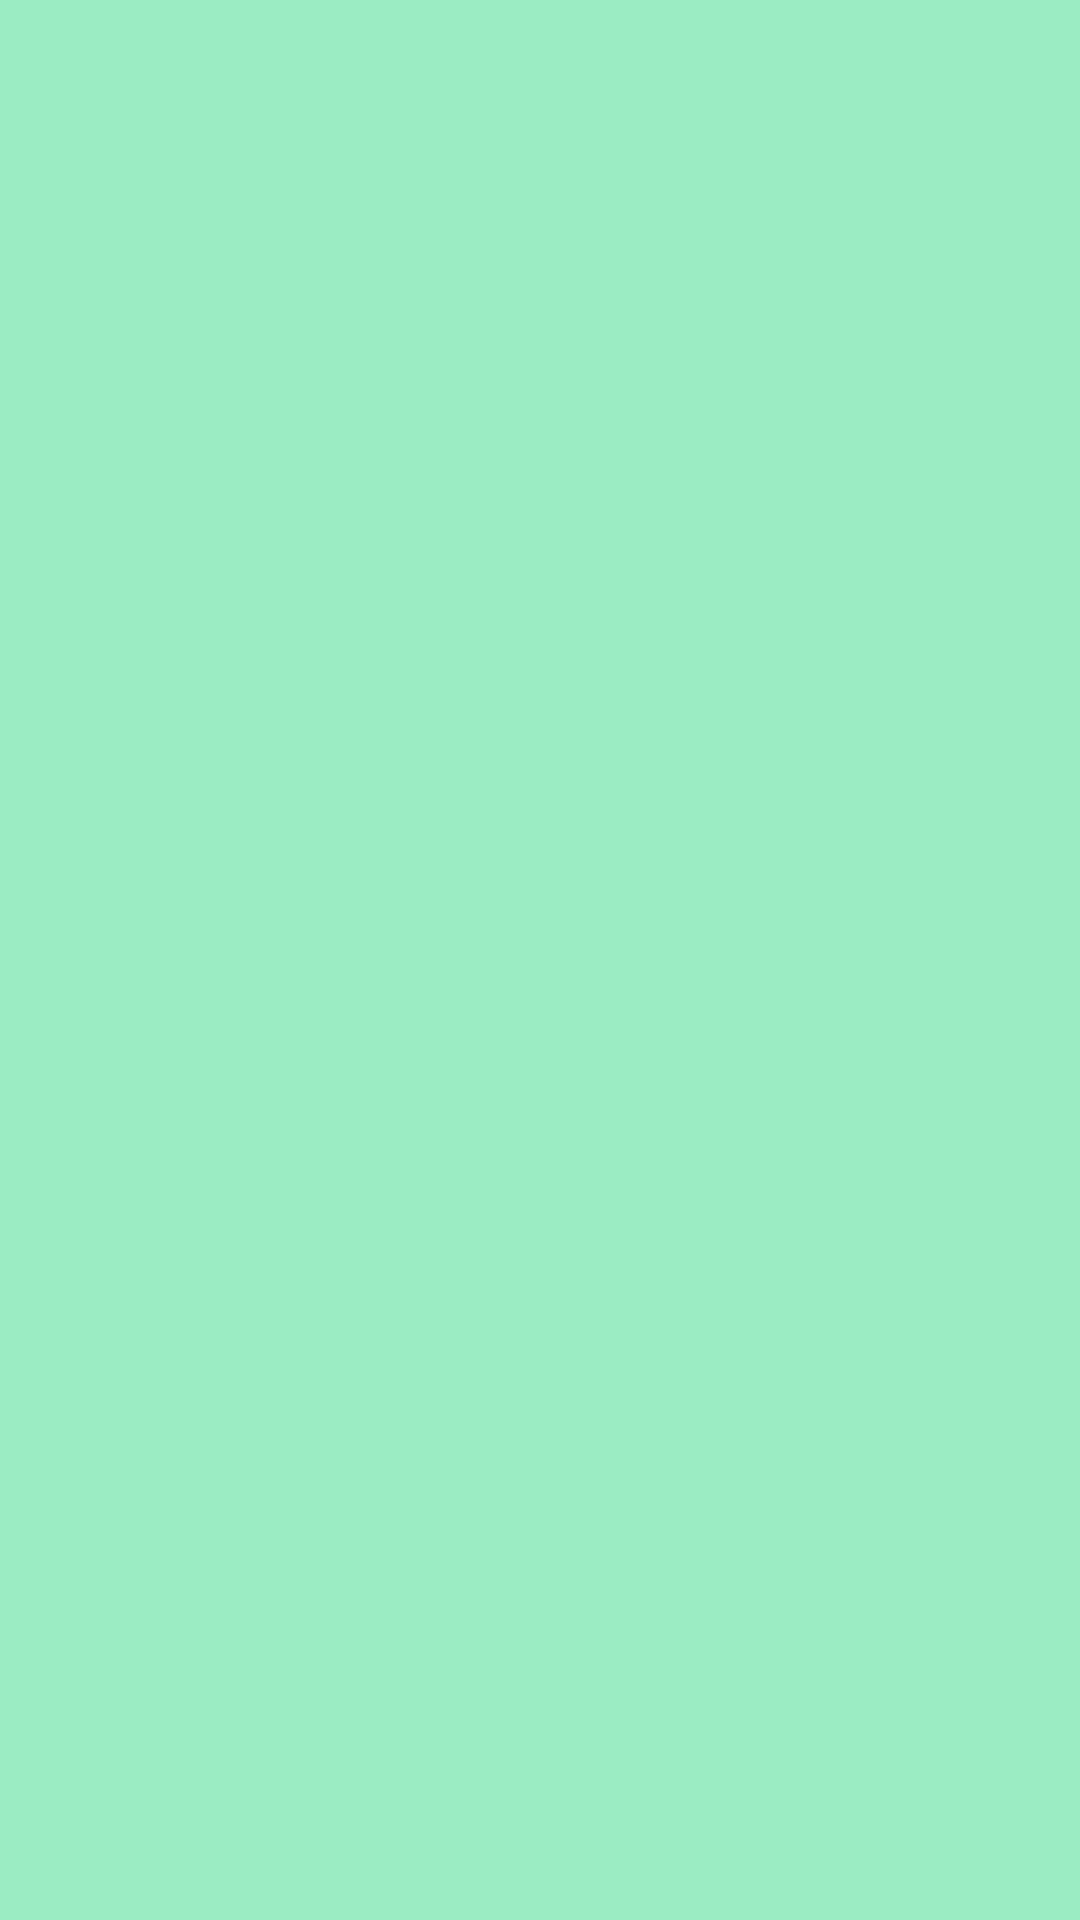 Mint Green 1080X1920 Wallpaper and Background Image